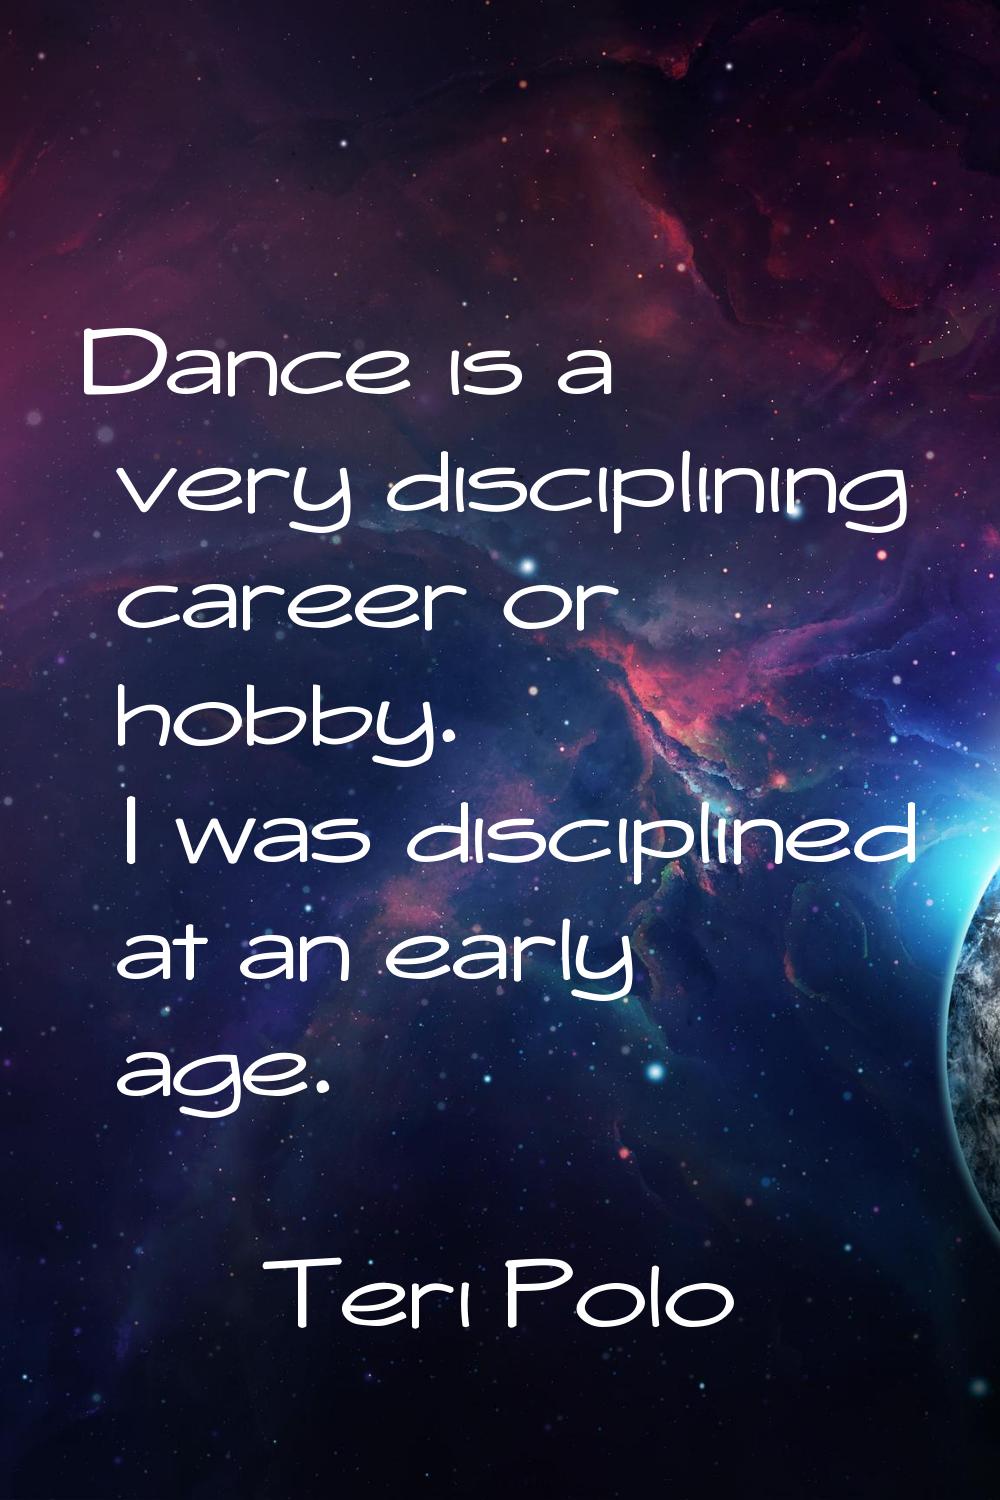 Dance is a very disciplining career or hobby. I was disciplined at an early age.